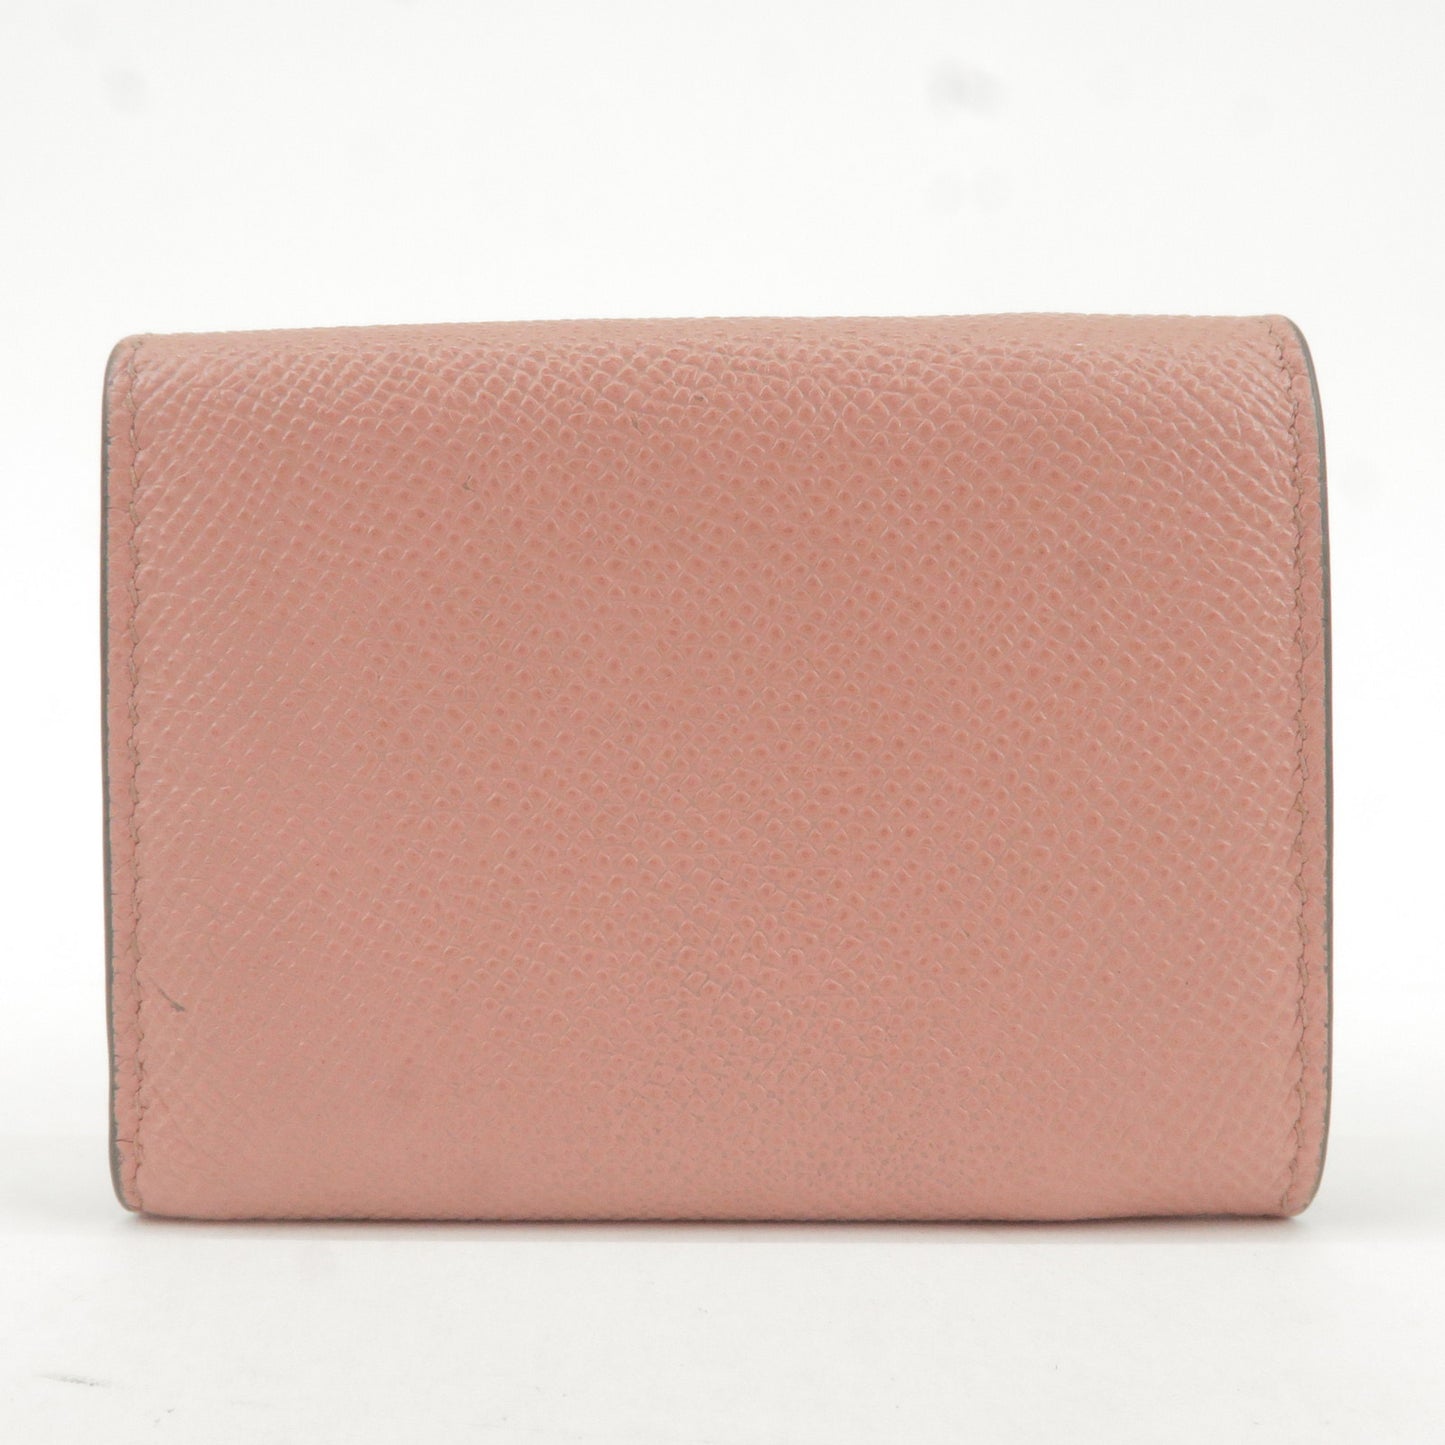 Christian Dior Leather Saddle Compact Trifold Wallet Pink